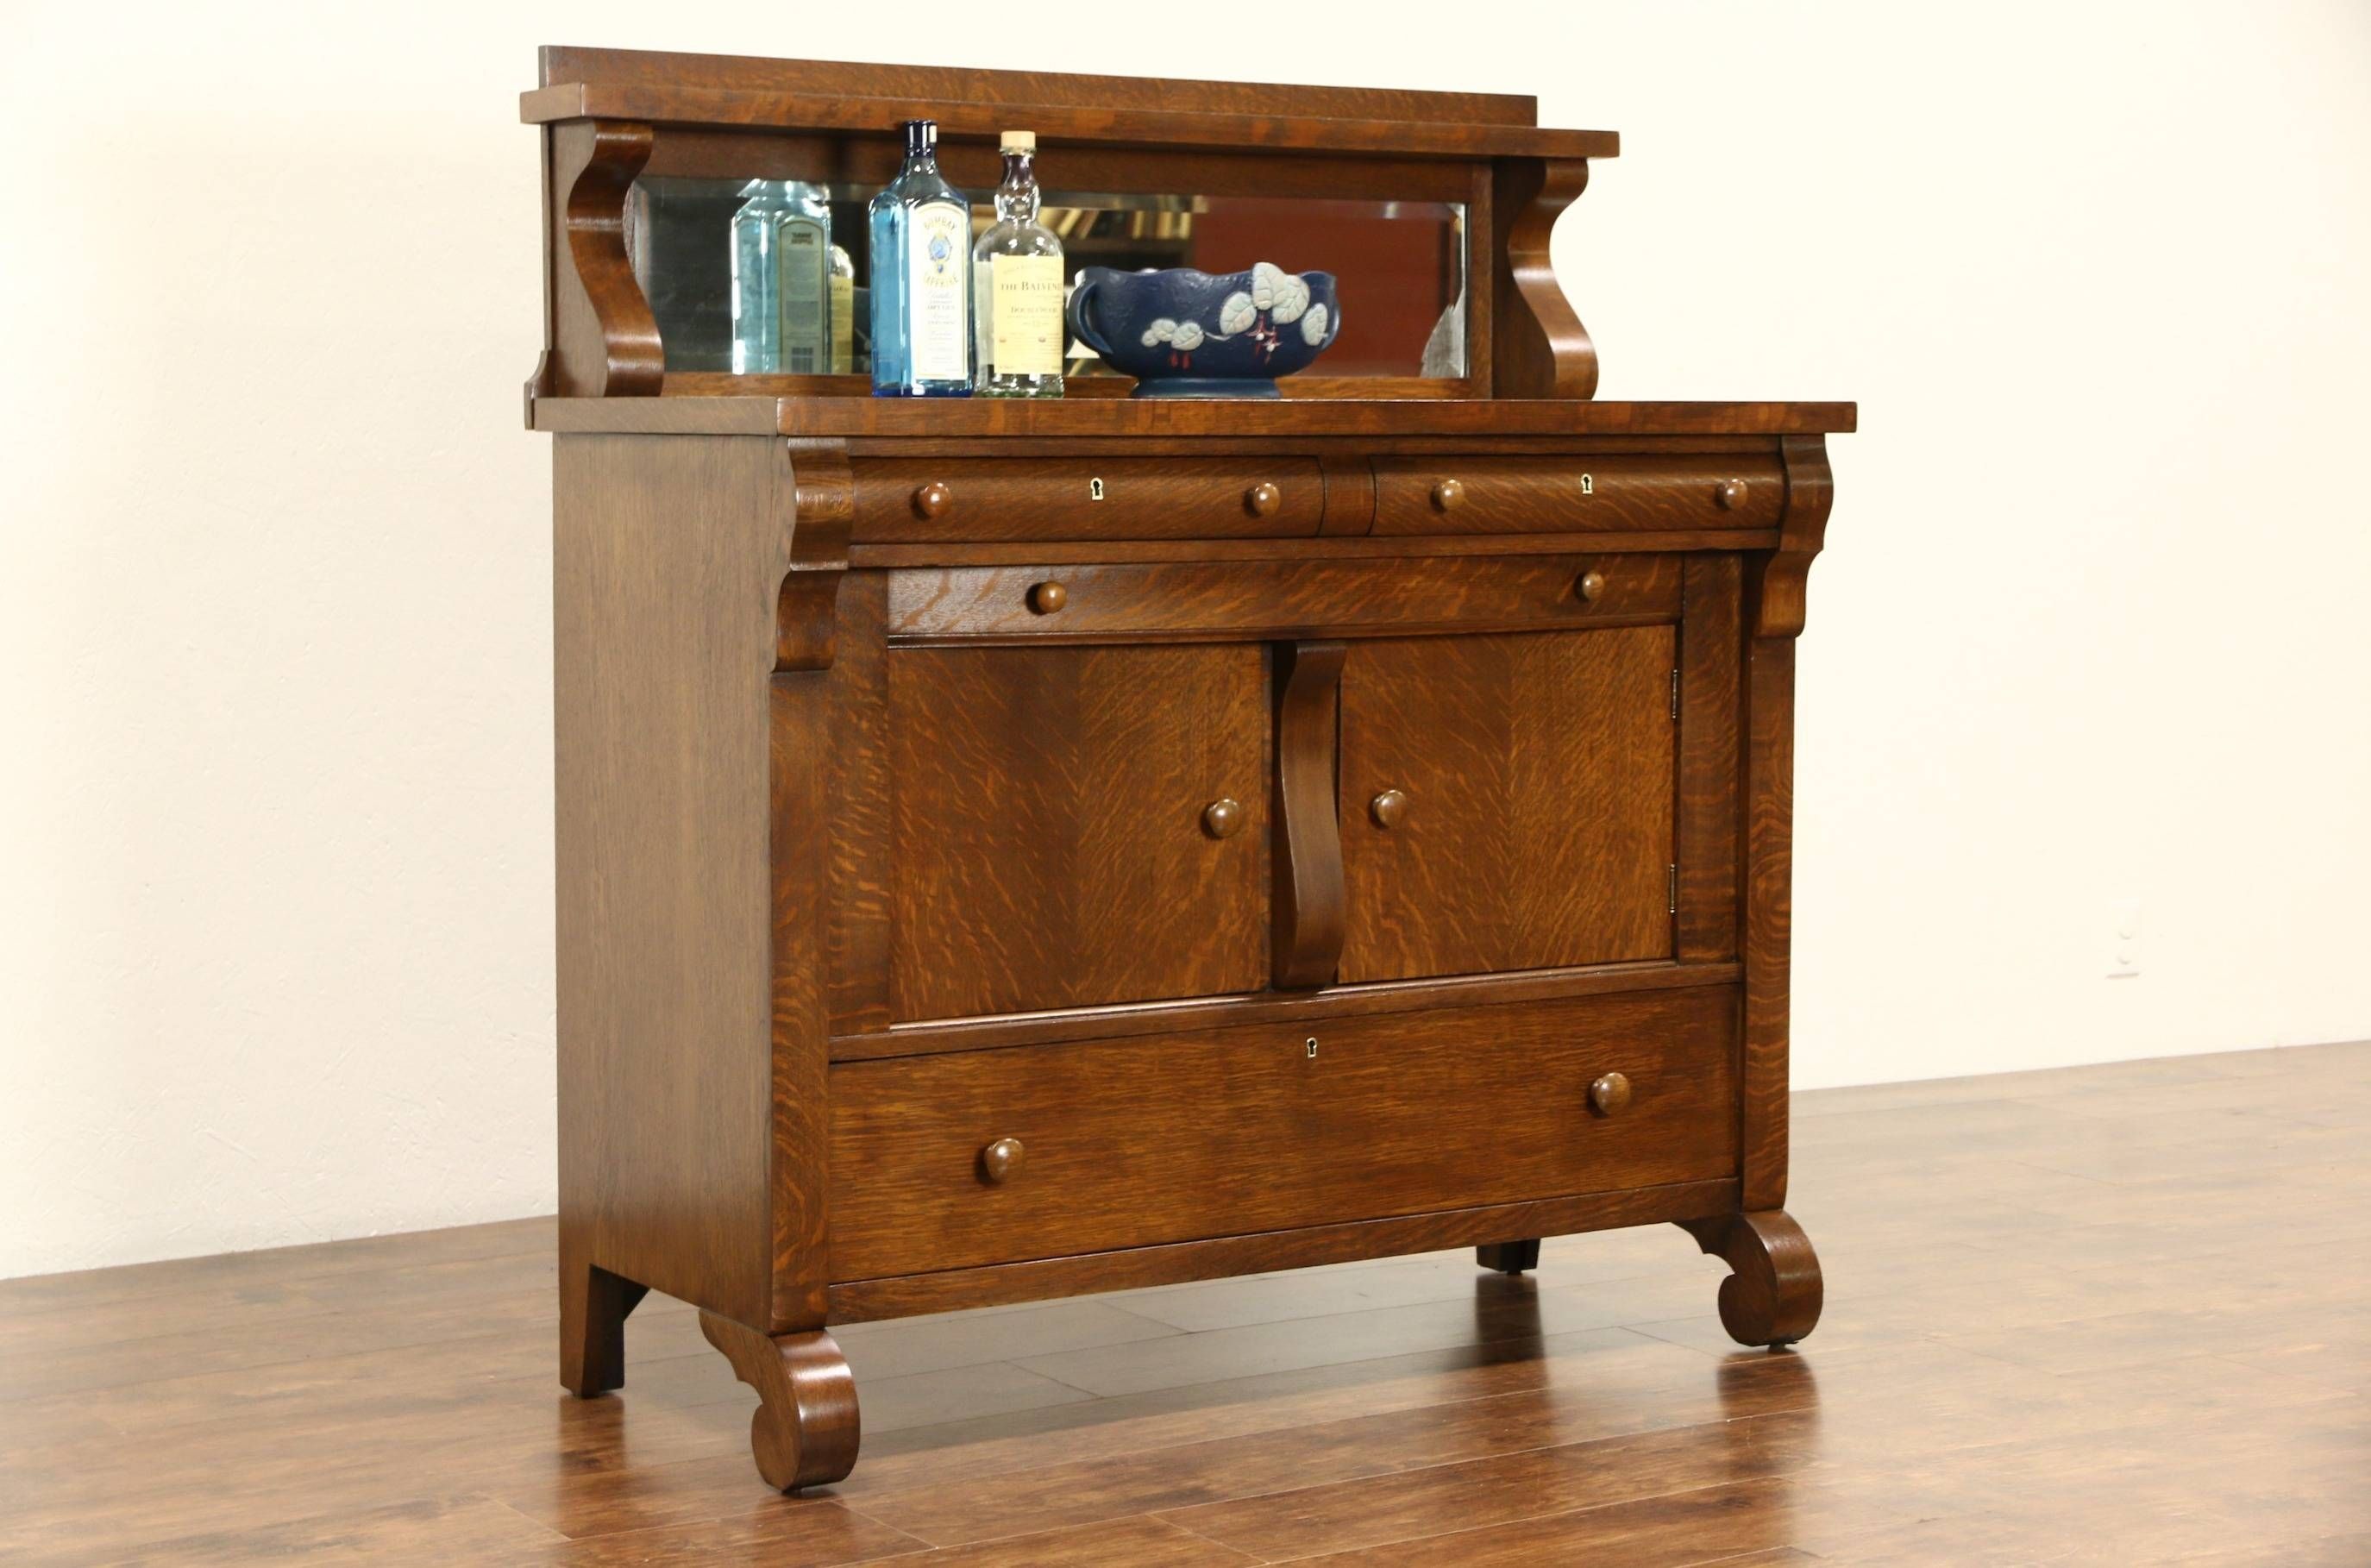 Sold – Oak 1900 Antique Empire Sideboard Or Buffet, Beveled Mirror Regarding Most Recently Released Antique Sideboards With Mirror (View 1 of 15)